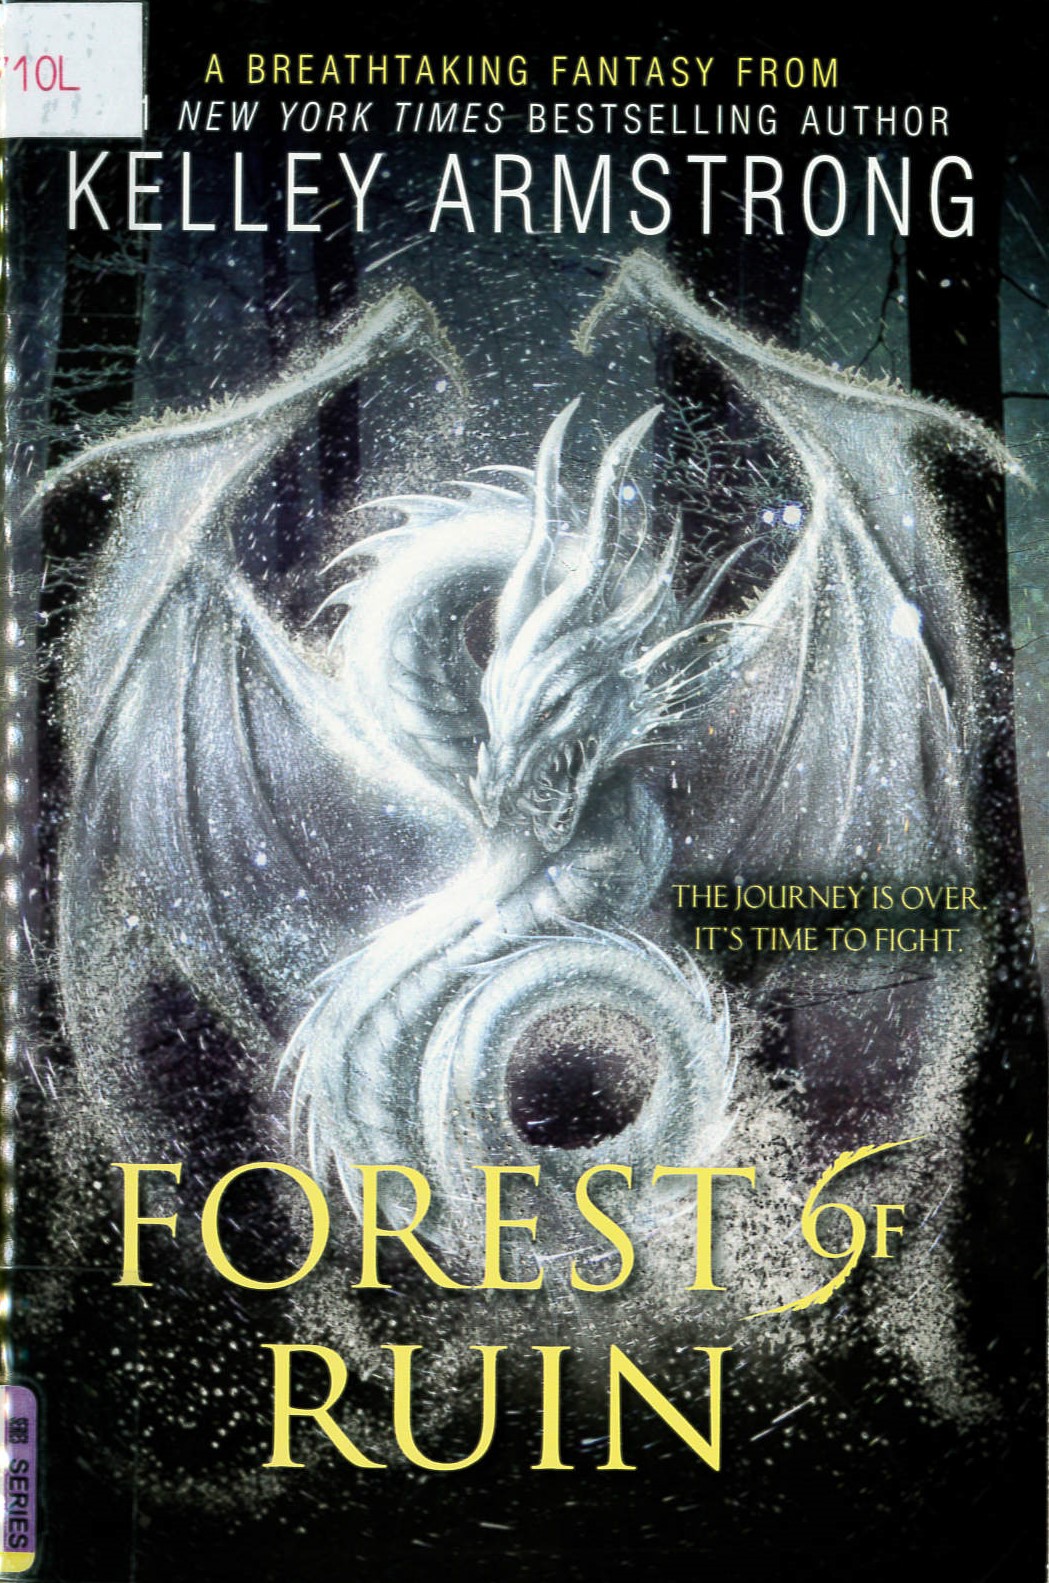 Forest of ruin /